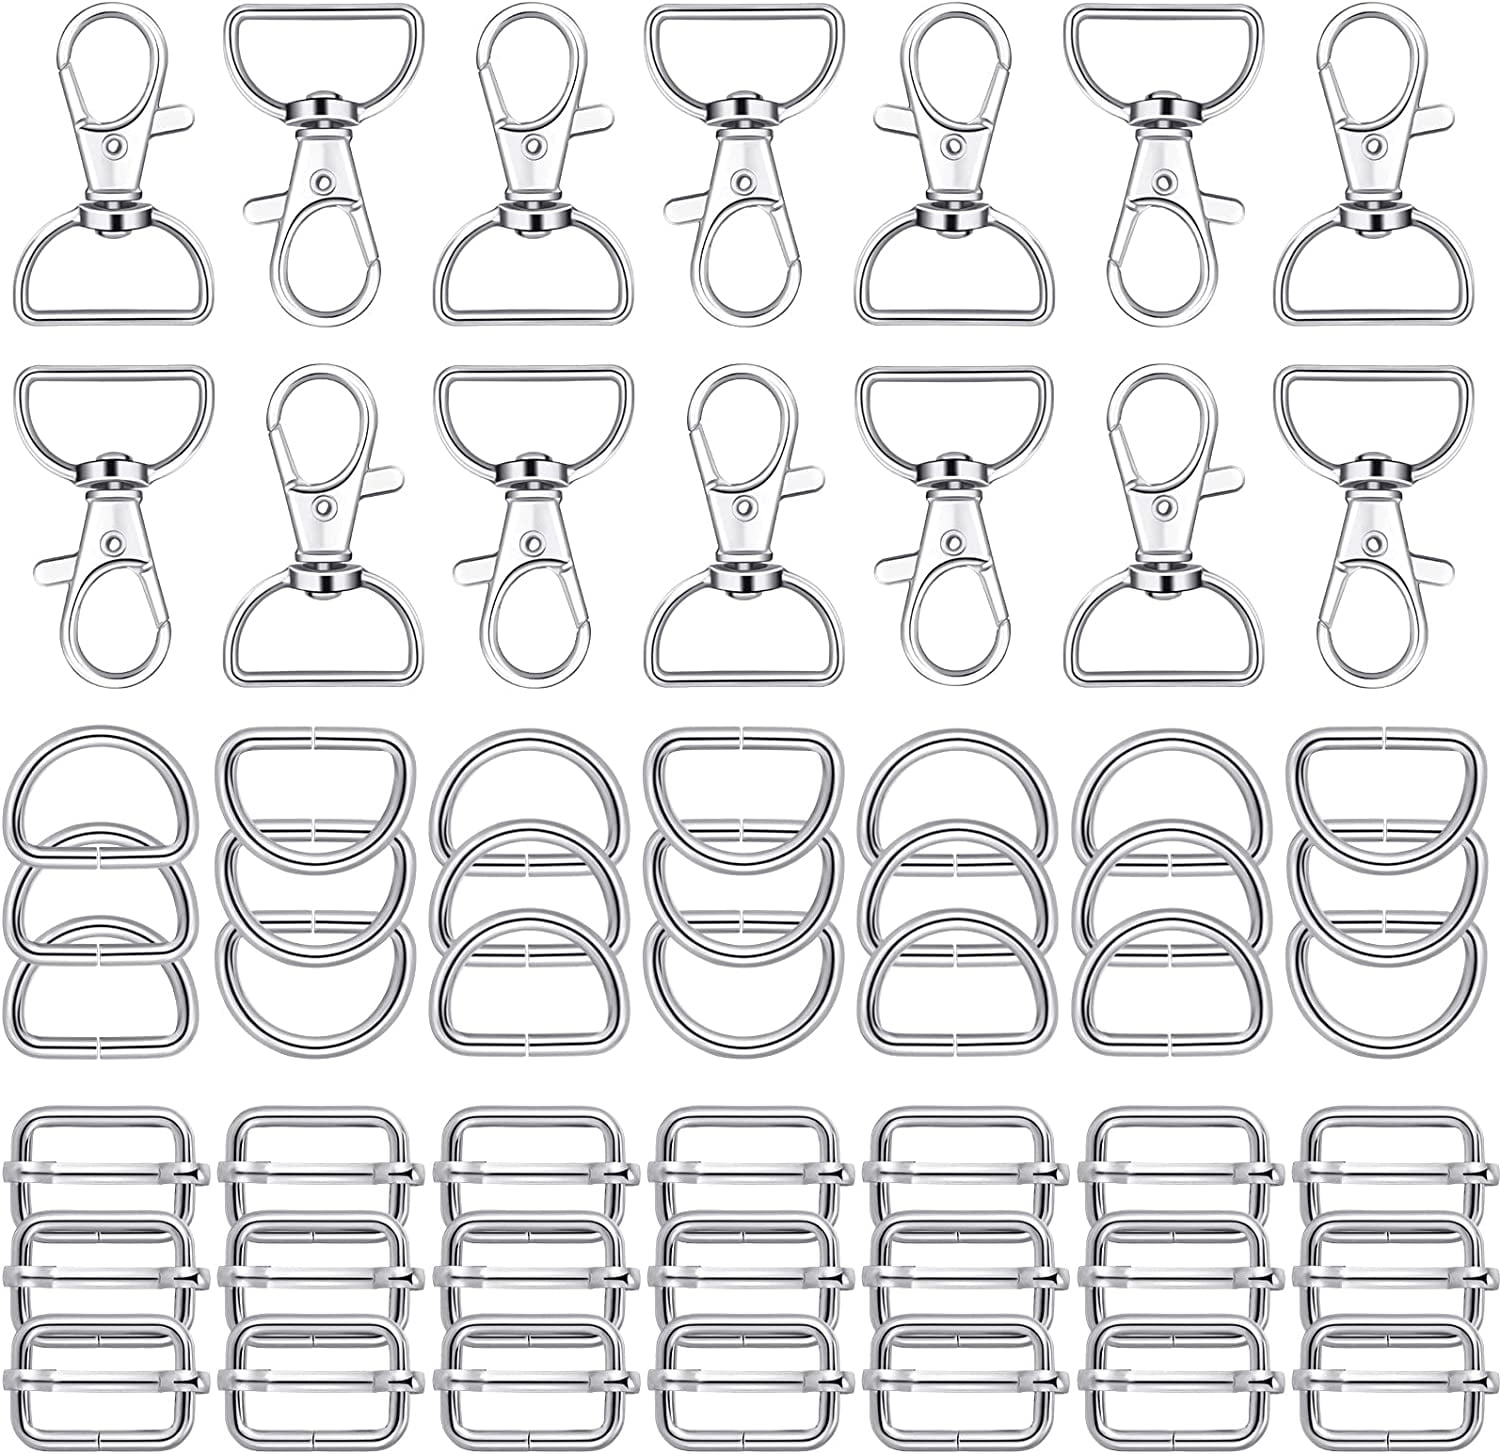 56 Pieces D Rings for Purse Bag Hardware Purse Hardware for Bag